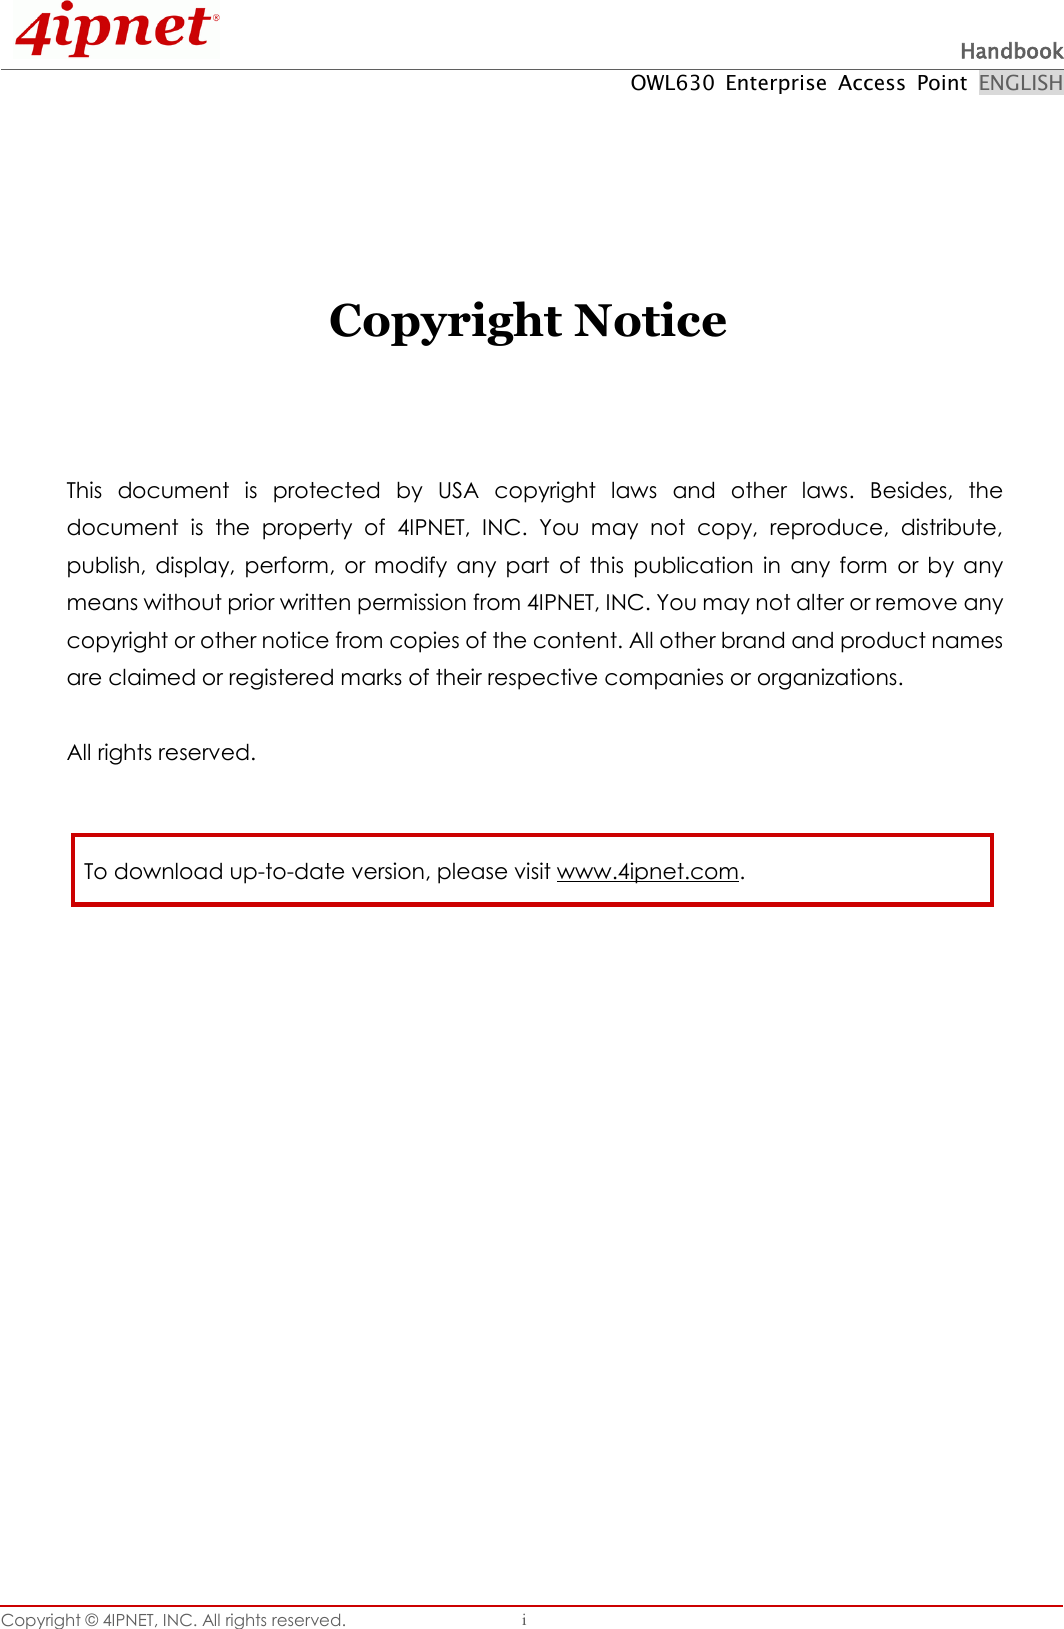  Handbook OWL630  Enterprise  Access  Point  ENGLISH Copyright ©  4IPNET, INC. All rights reserved.   i     Copyright Notice    This  document  is  protected  by  USA  copyright  laws  and  other  laws.  Besides,  the document  is  the  property  of  4IPNET,  INC.  You  may  not  copy,  reproduce,  distribute, publish,  display,  perform,  or  modify  any  part  of  this  publication  in  any  form  or  by  any means without prior written permission from 4IPNET, INC. You may not alter or remove any copyright or other notice from copies of the content. All other brand and product names are claimed or registered marks of their respective companies or organizations.  All rights reserved.     To download up-to-date version, please visit www.4ipnet.com. 